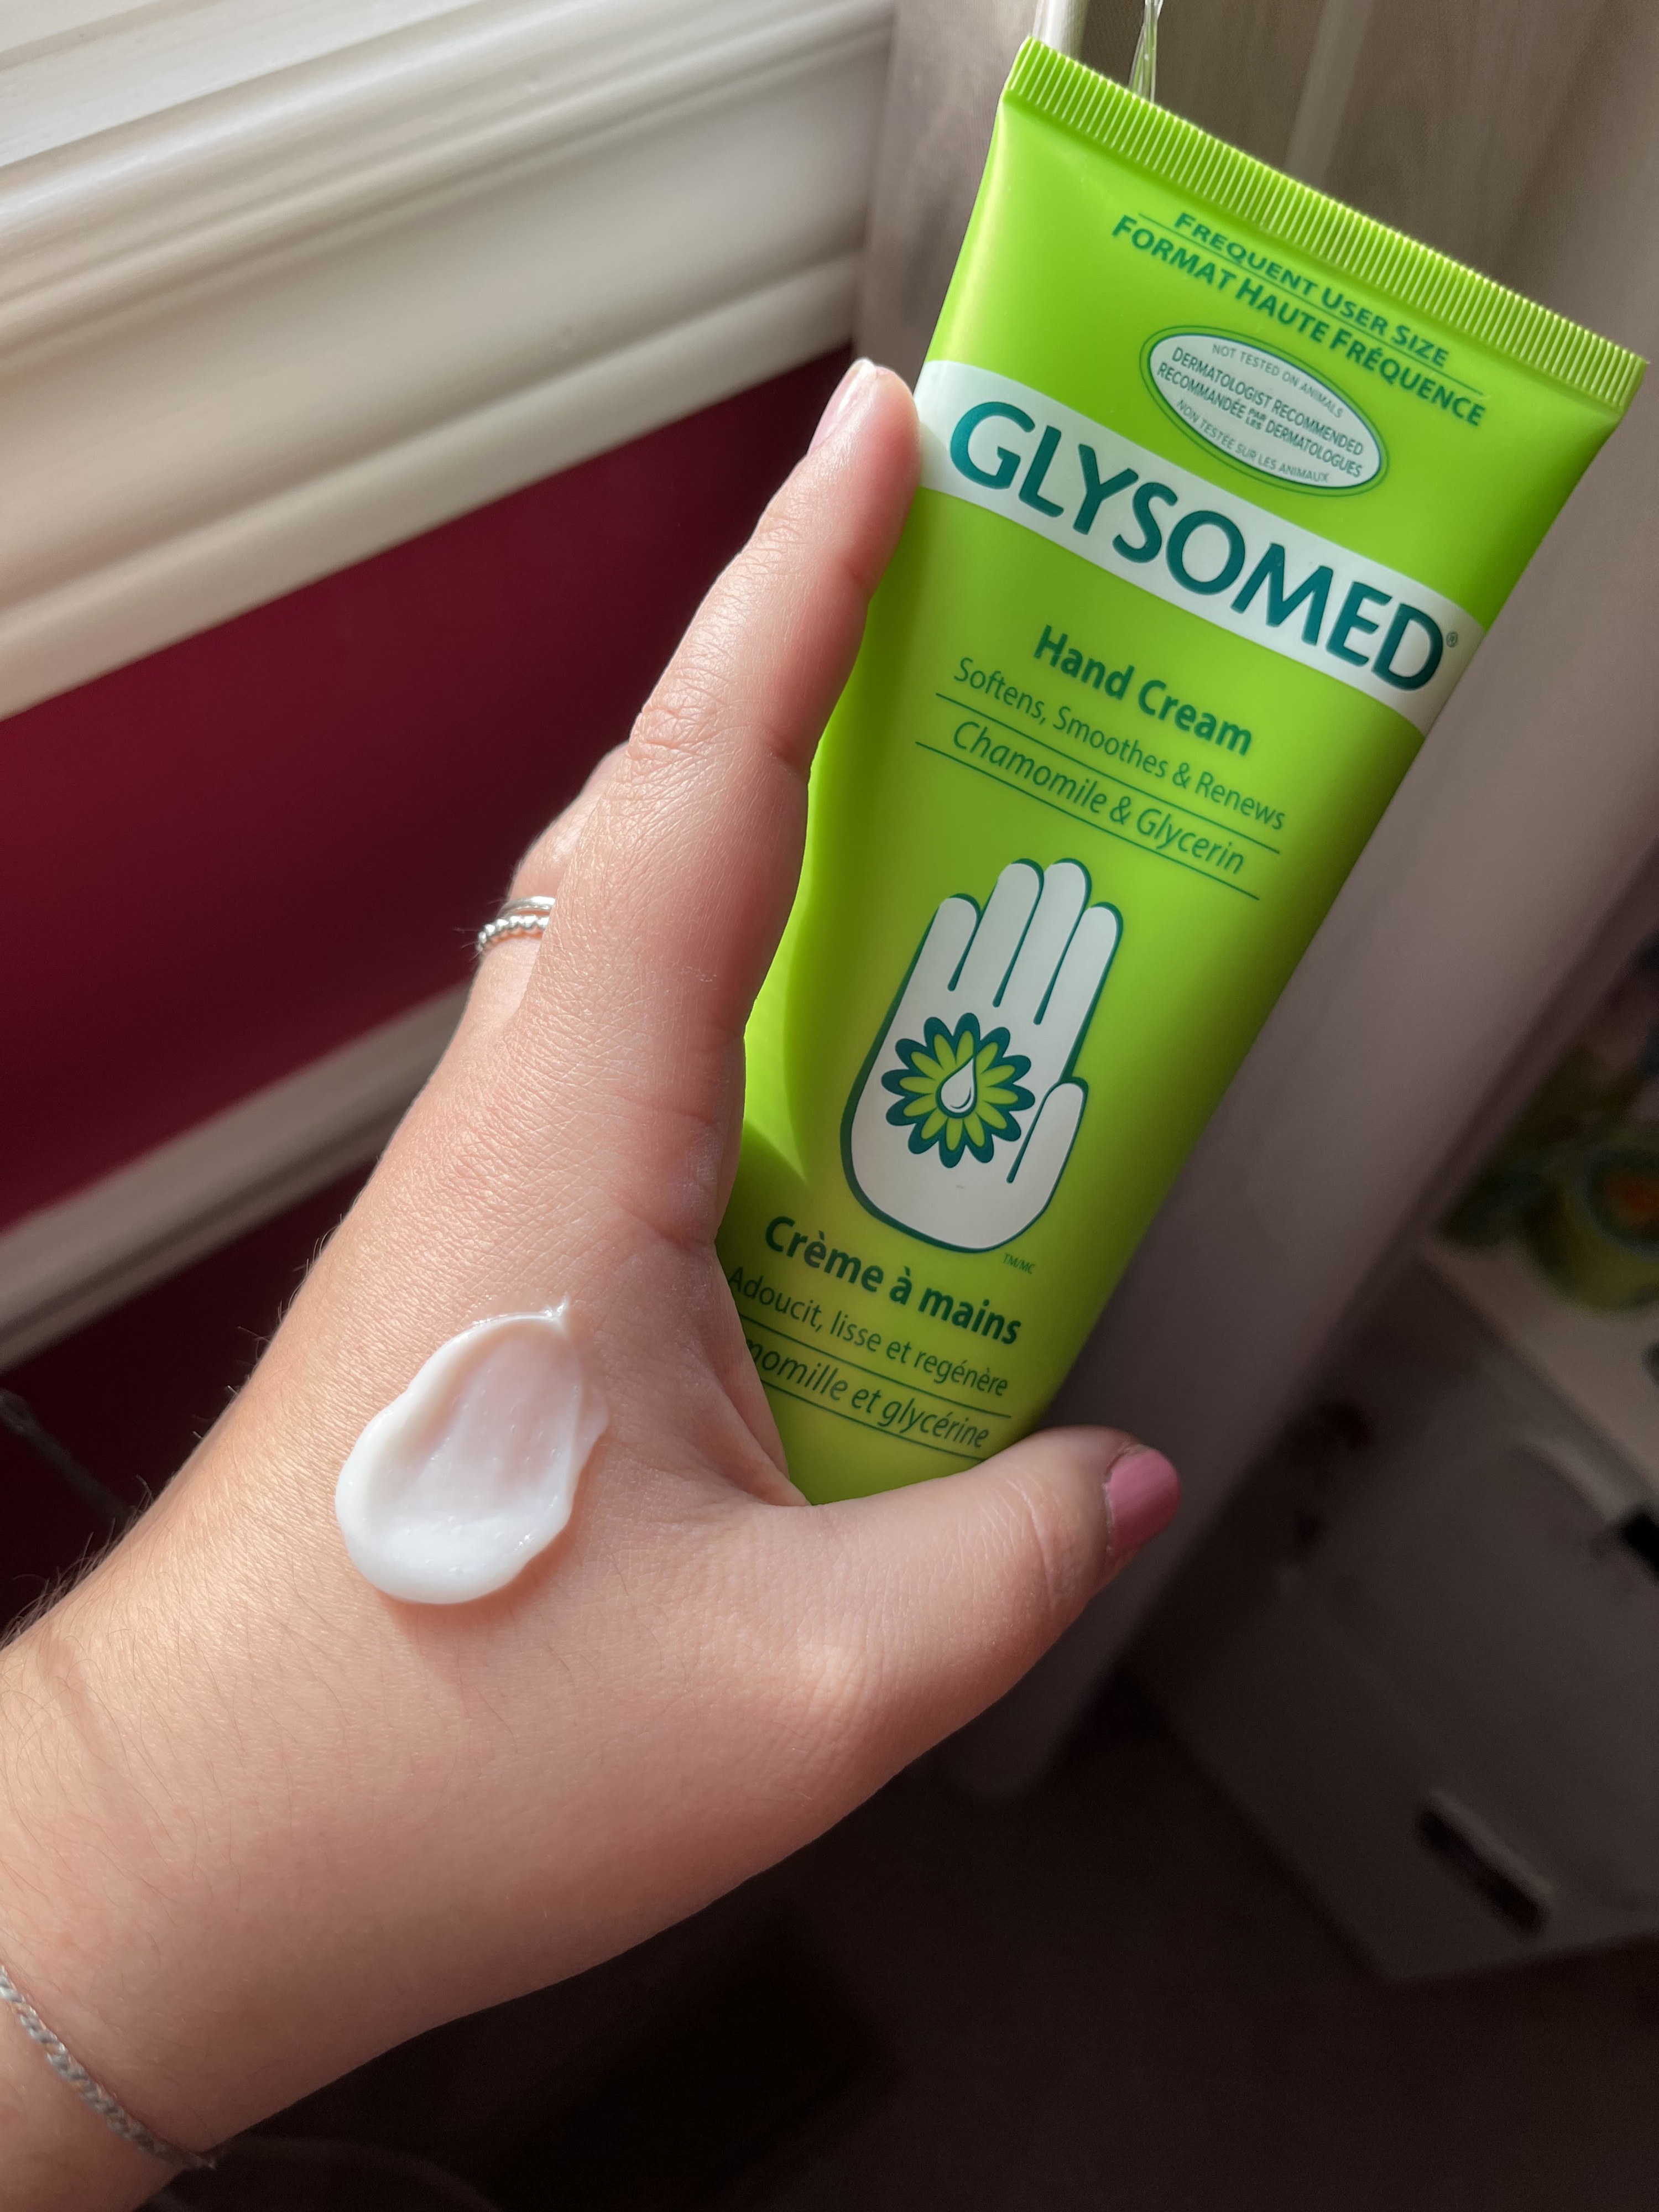 Bianca holding up a tube of the hand cream with a small dollop of it on her hand